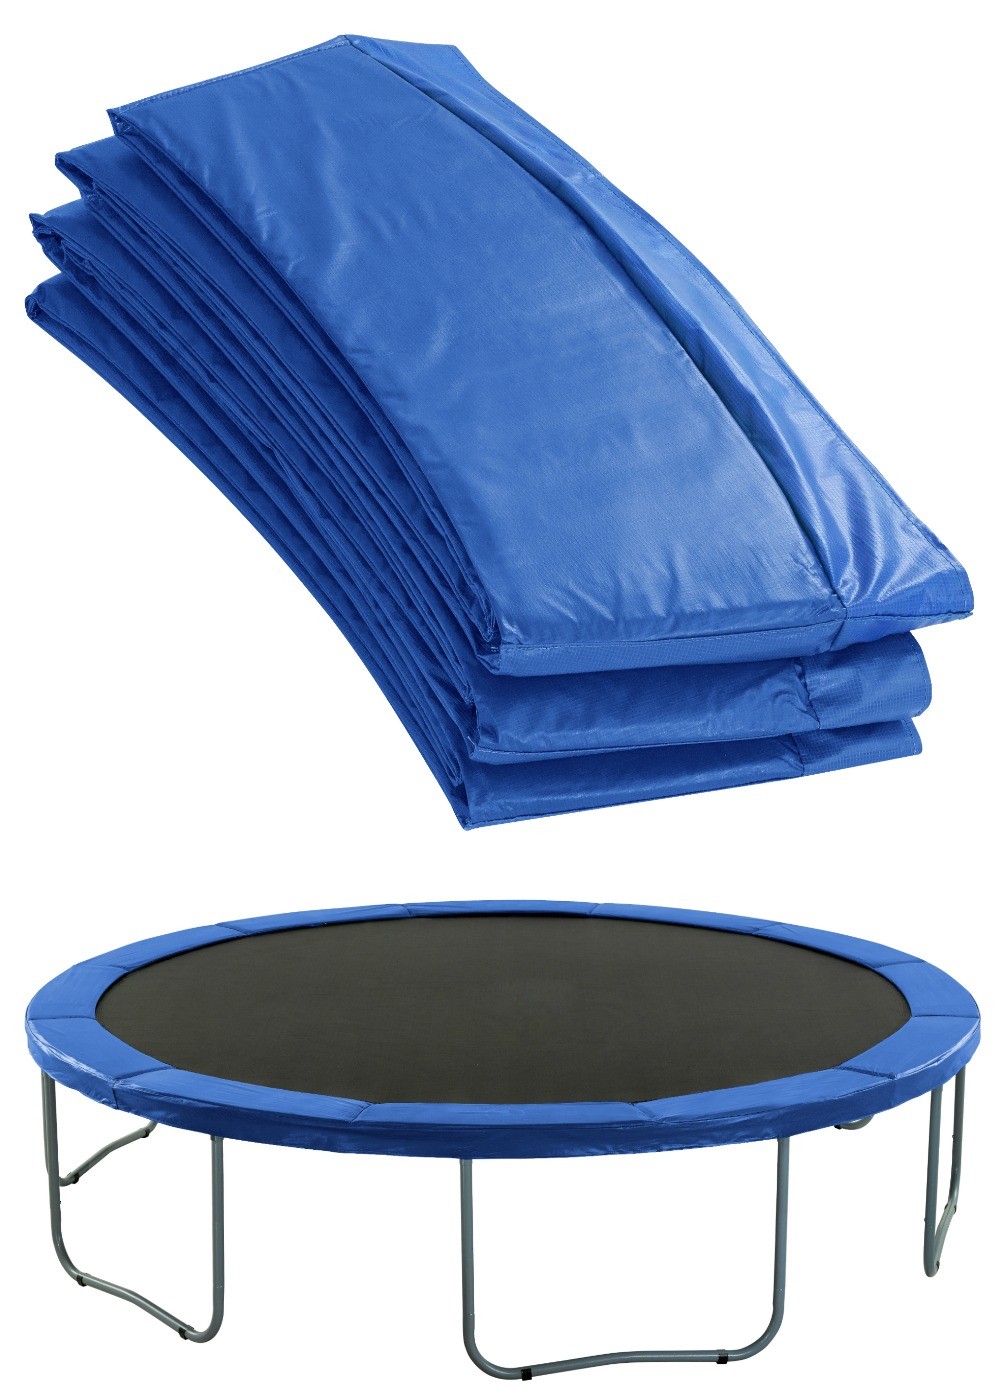 Premium Trampoline Replacement Safety Pad (Spring Cover) Fits for 12 FT. Round Frames - 3/4" Foam - Blue